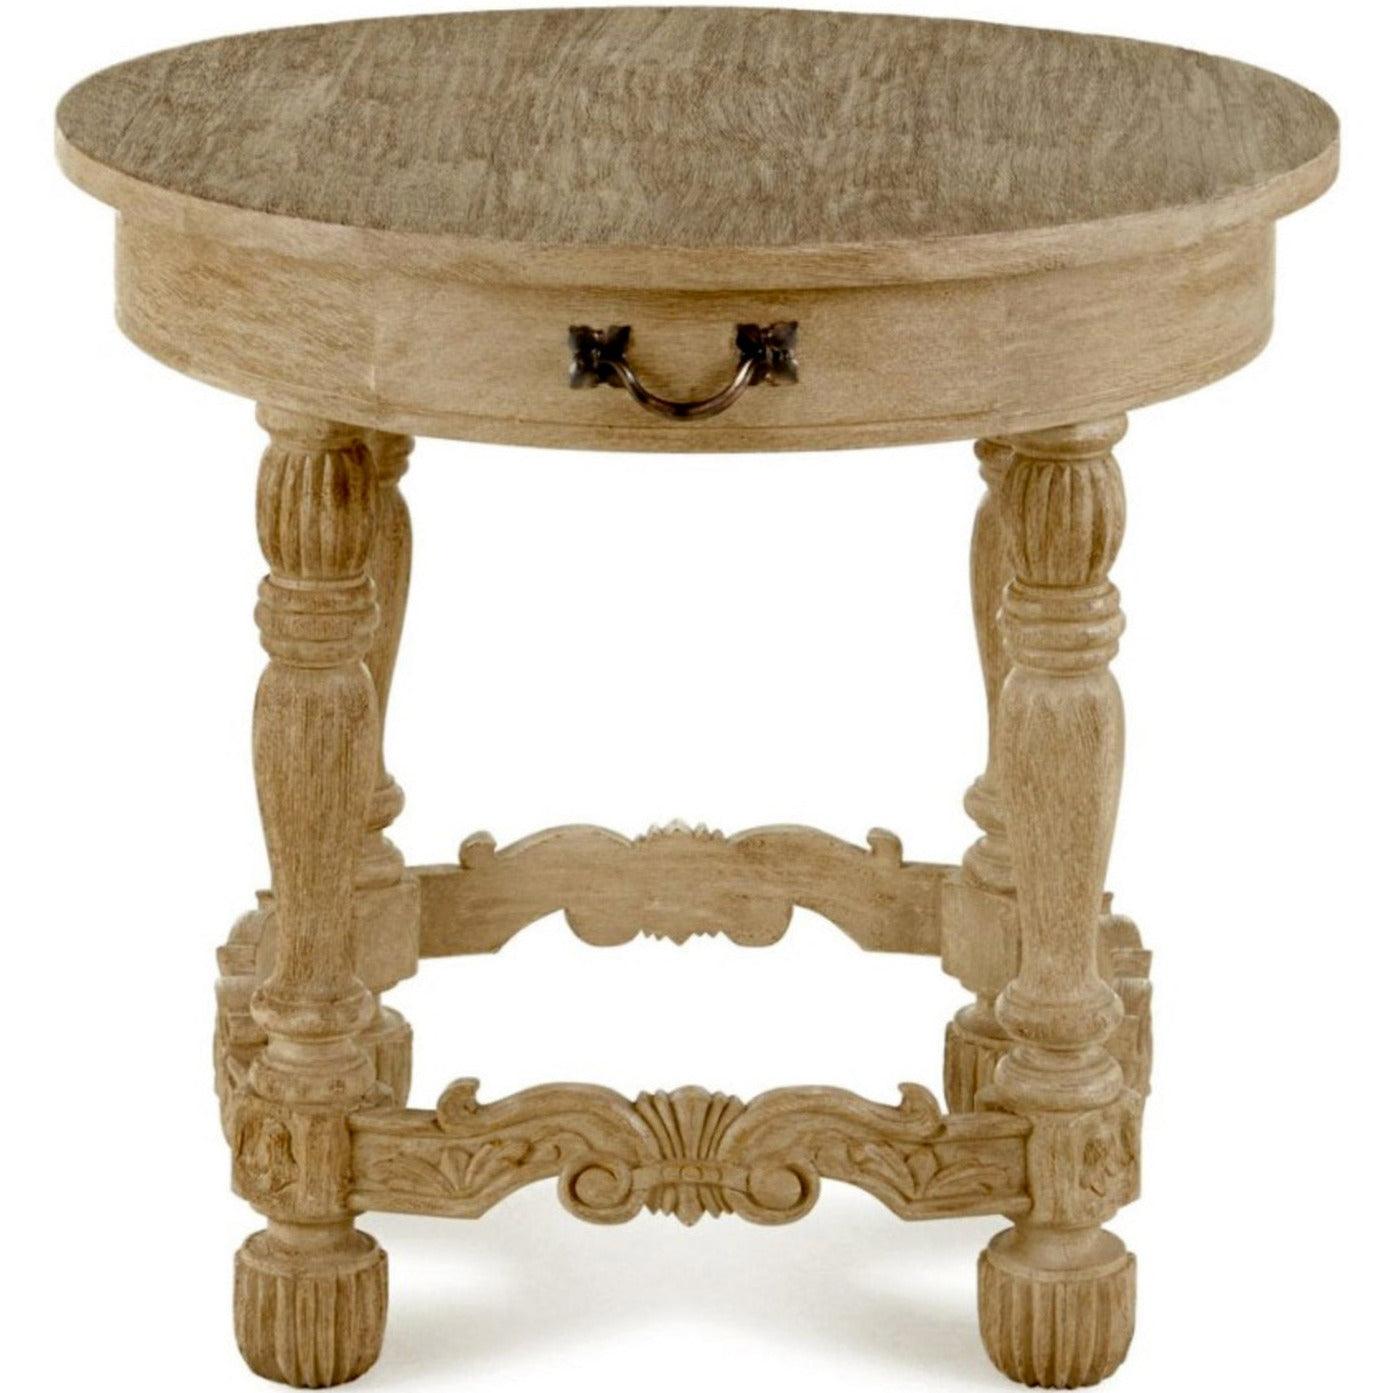 Provencal Round Side Table with a Drawer - Belle Escape